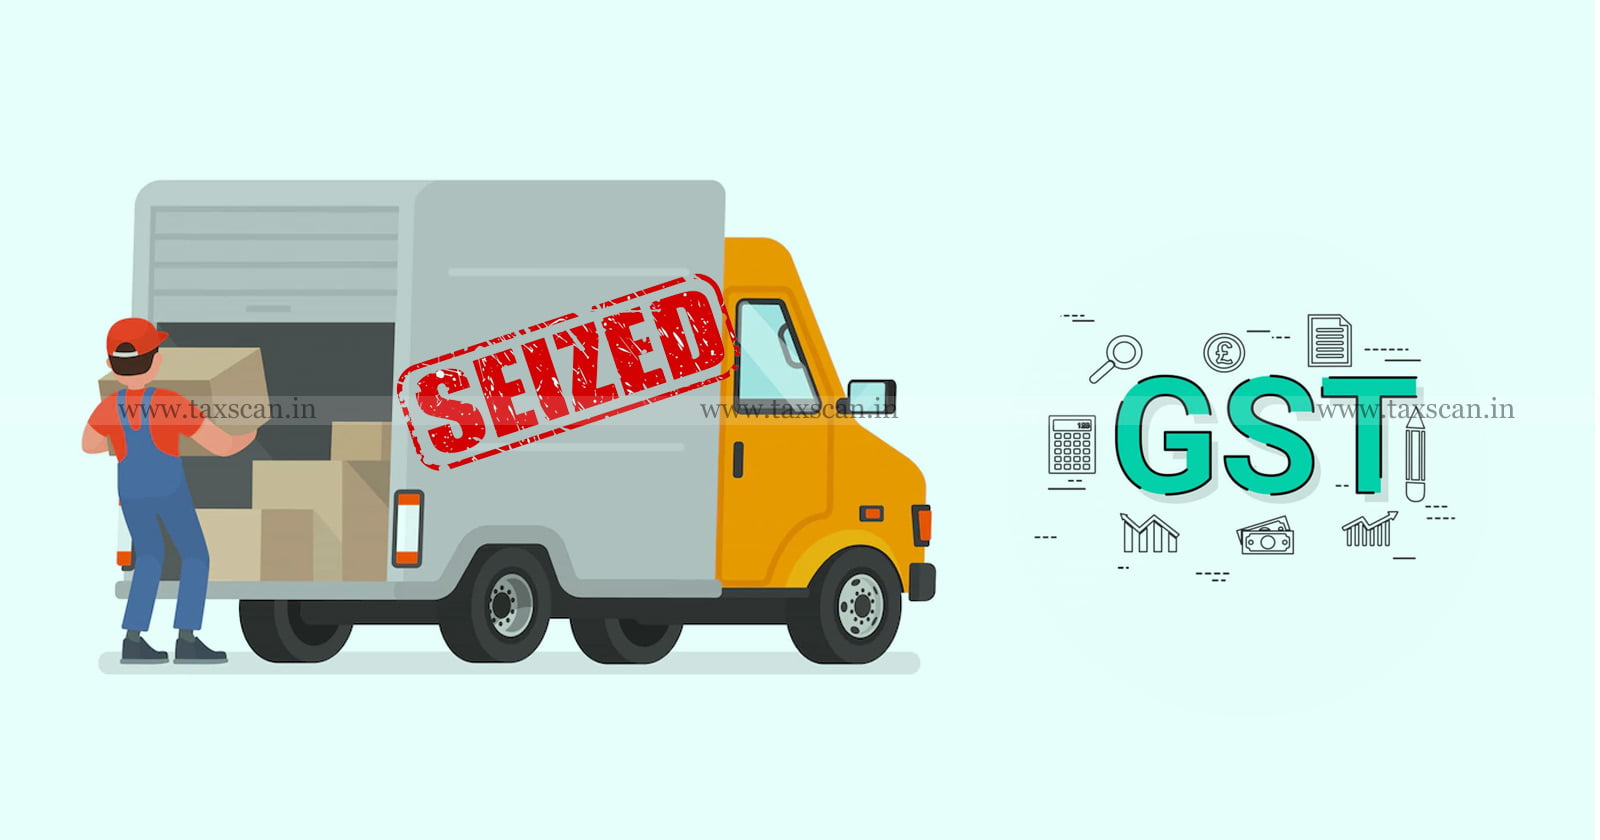 GST - Authorities - can - retain - Seized - Goods - for - a - Maximum - Period - of - Four - and - Half - Years - Delhi - HC - TAXSCAN